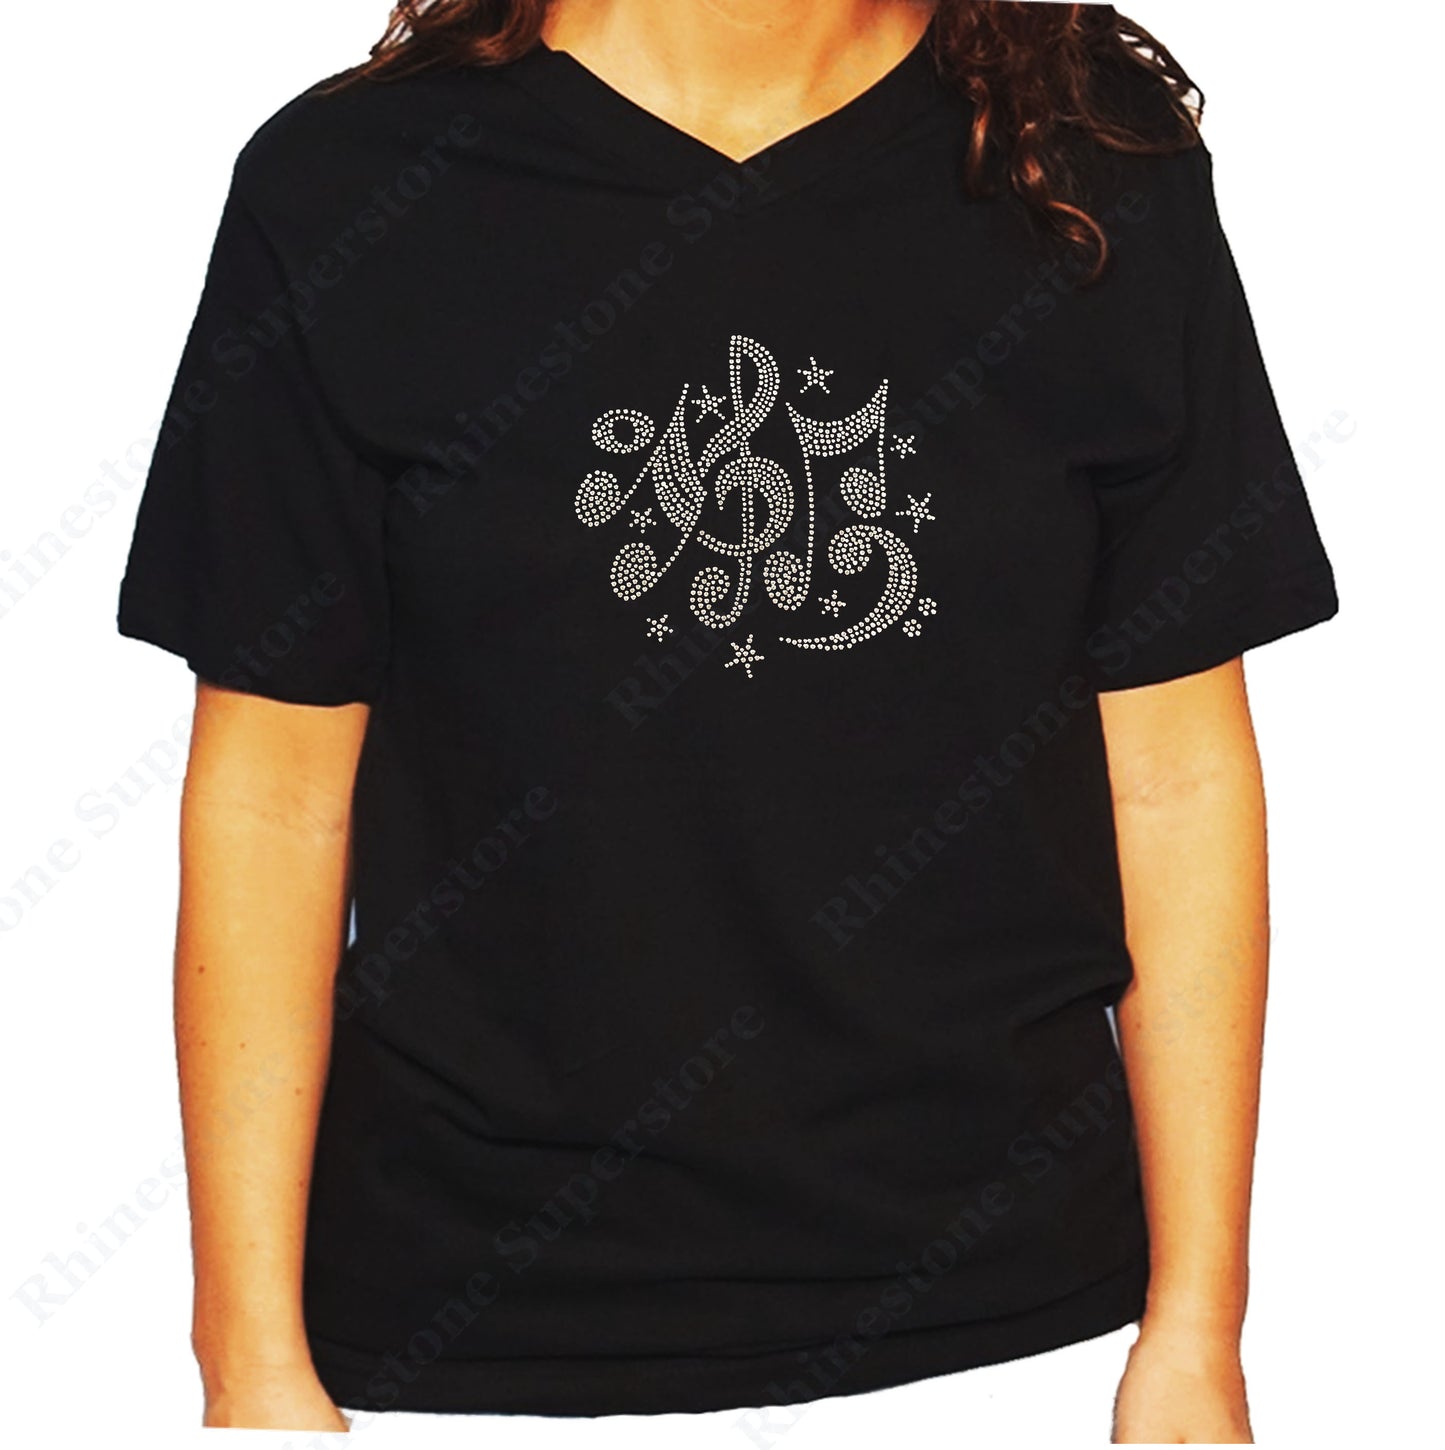 Women's / Unisex T-Shirt with Music Notes and Stars in Rhinestones